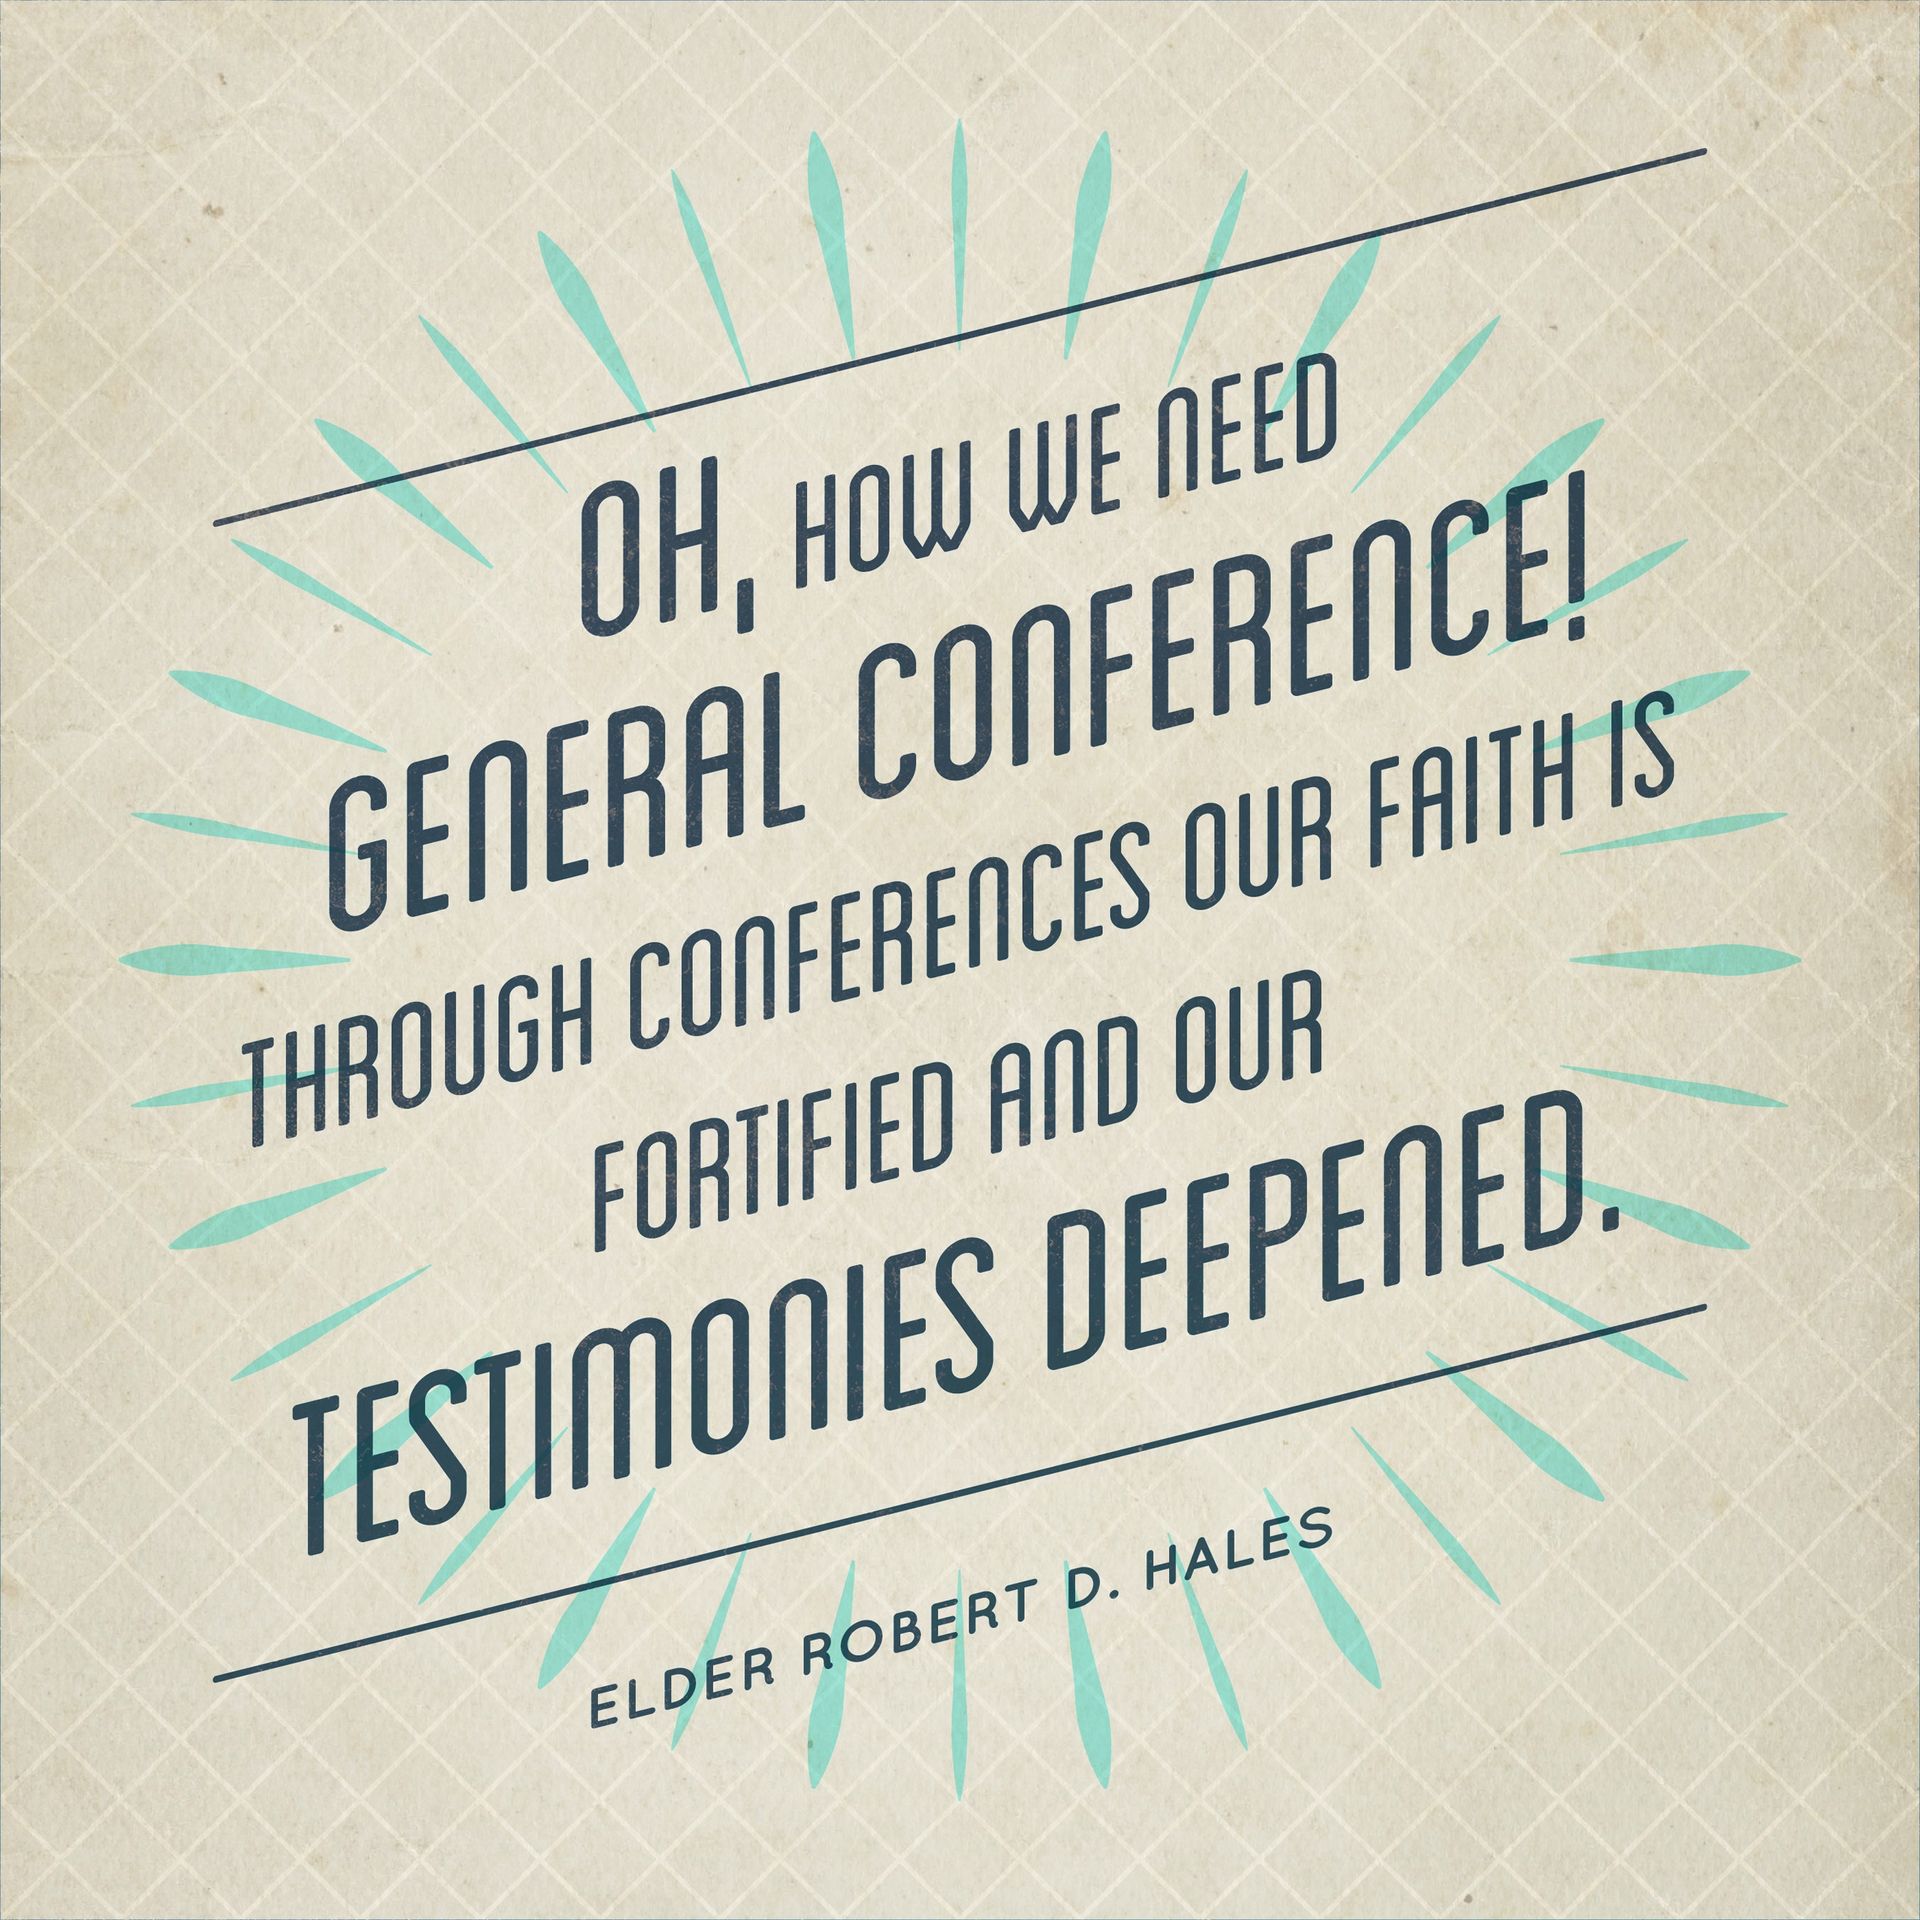 “Oh, how we need general conference! Through conferences our faith is fortified and our testimonies deepened.”—Elder Robert D. Hales, “General Conference: Strengthening Faith and Testimony”